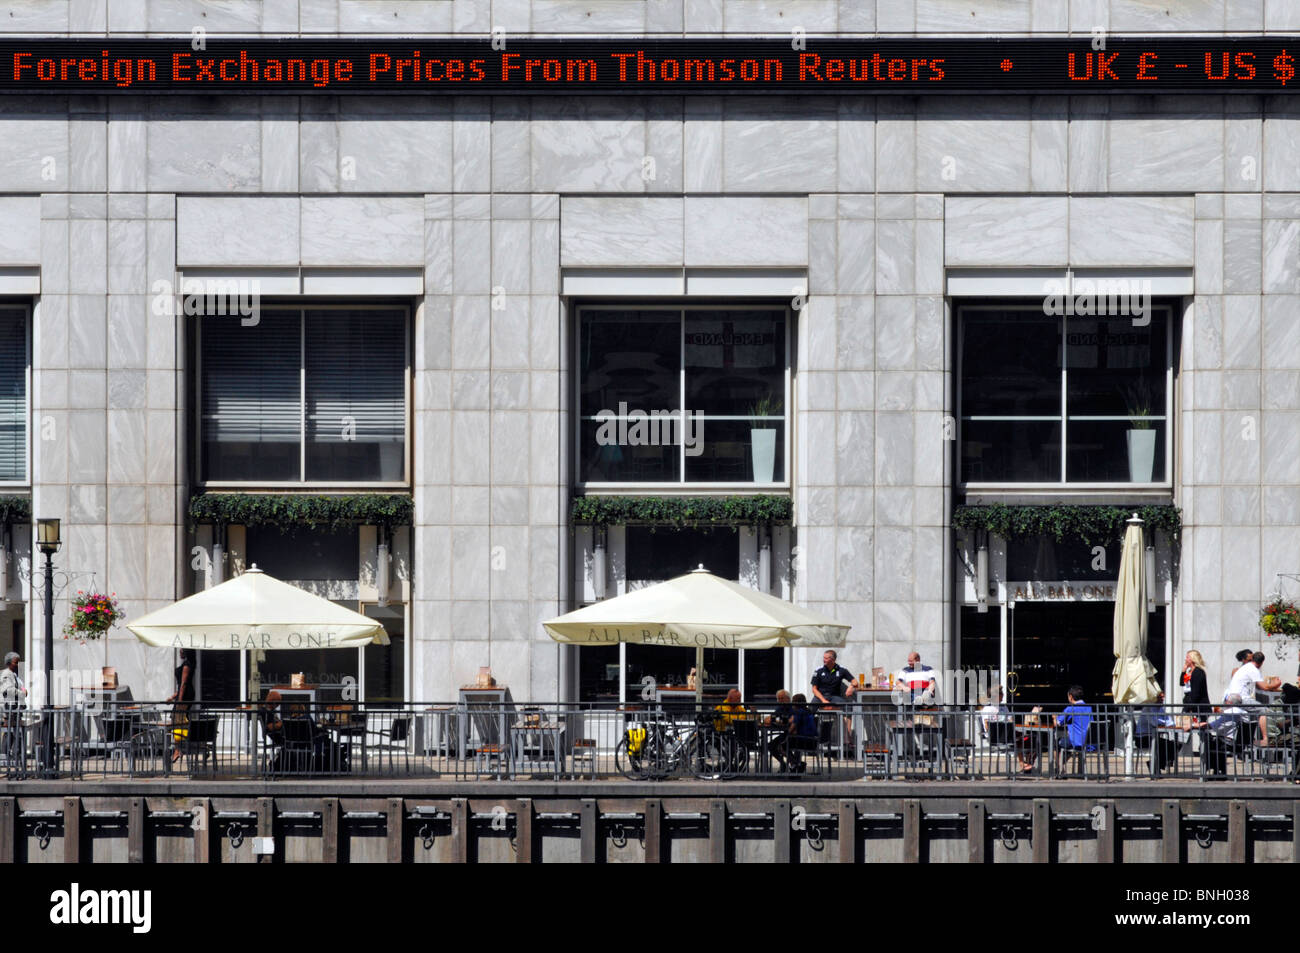 Canary Wharf Thomson Reuters electronic Foreign Exchange sign above outdoor bar Stock Photo